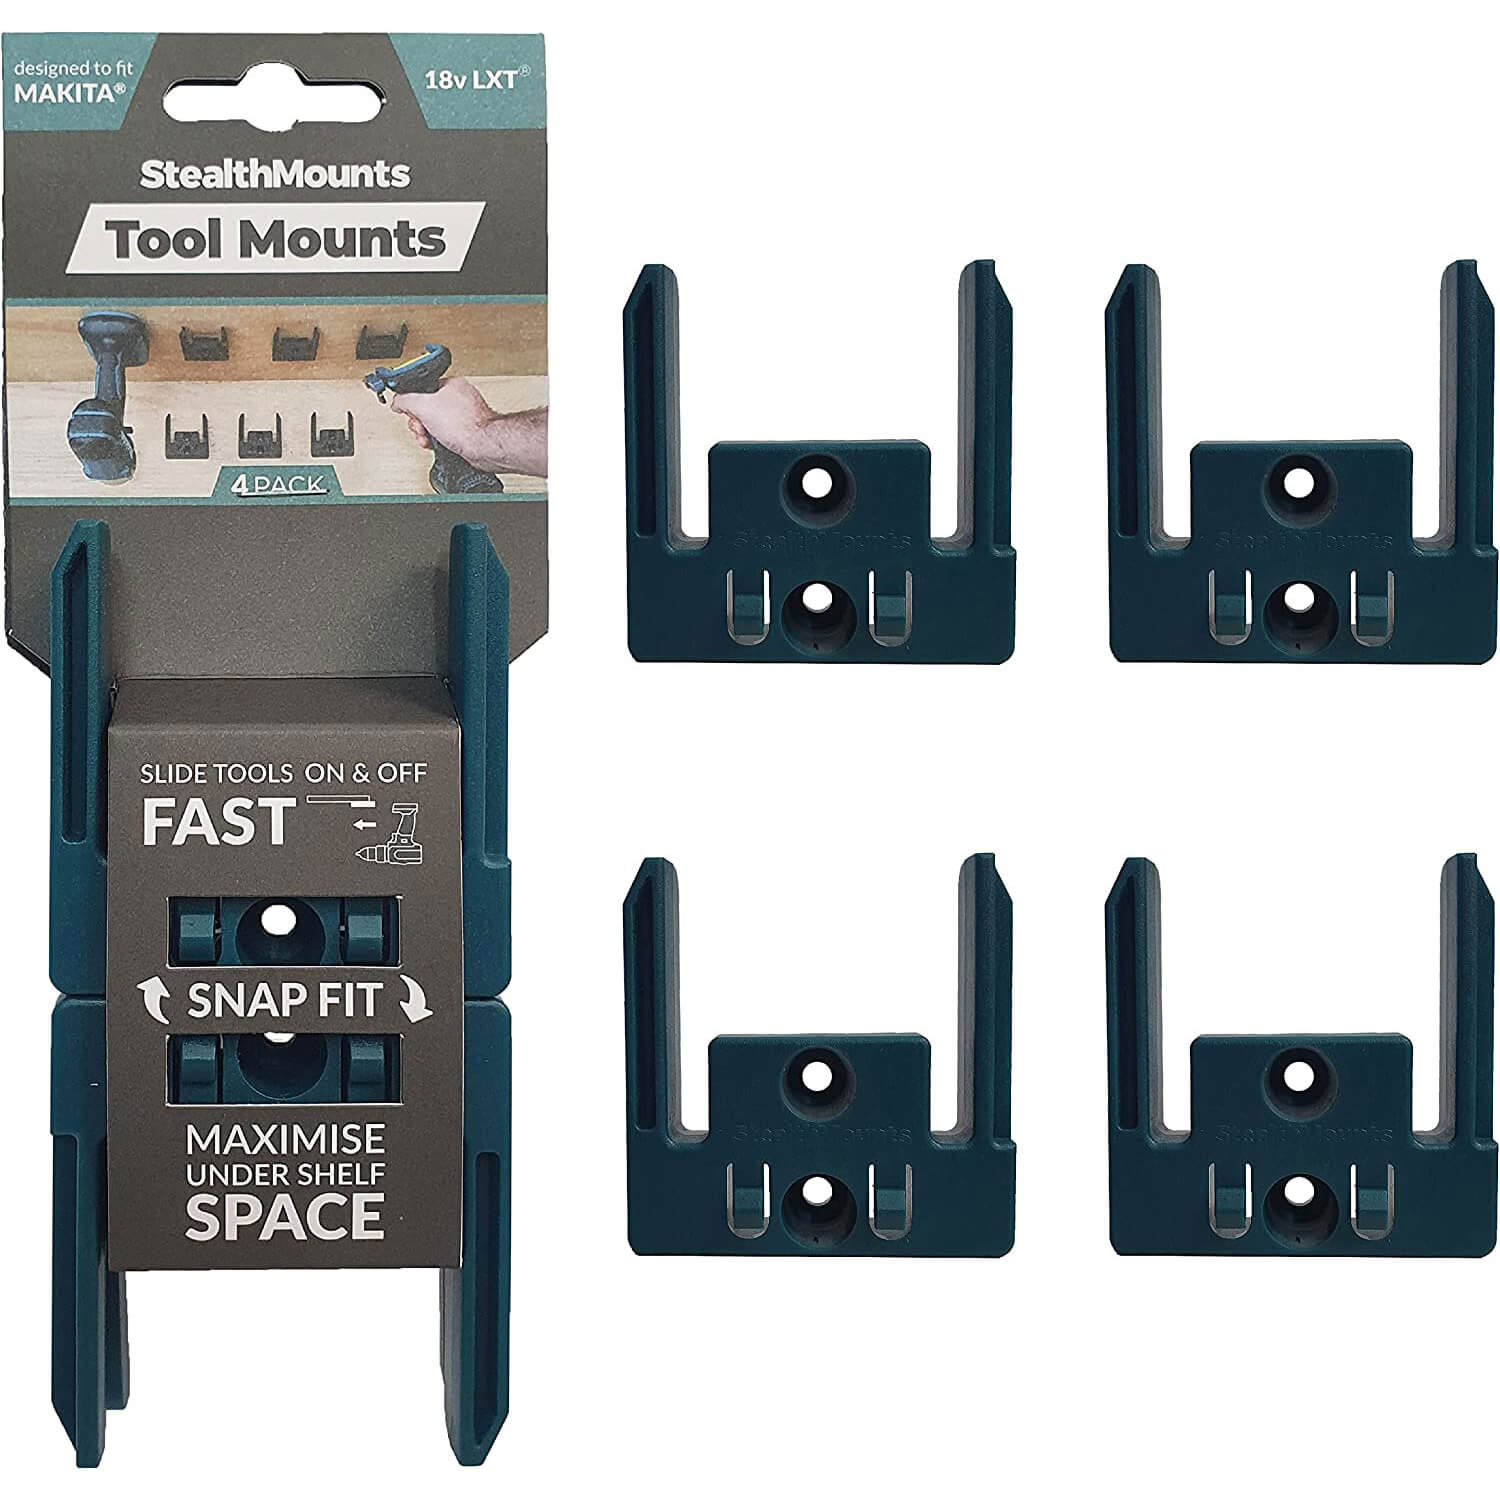 Stealth Mounts 4 Pack Tool Mounts for Makita 18V LXT Tools Blue